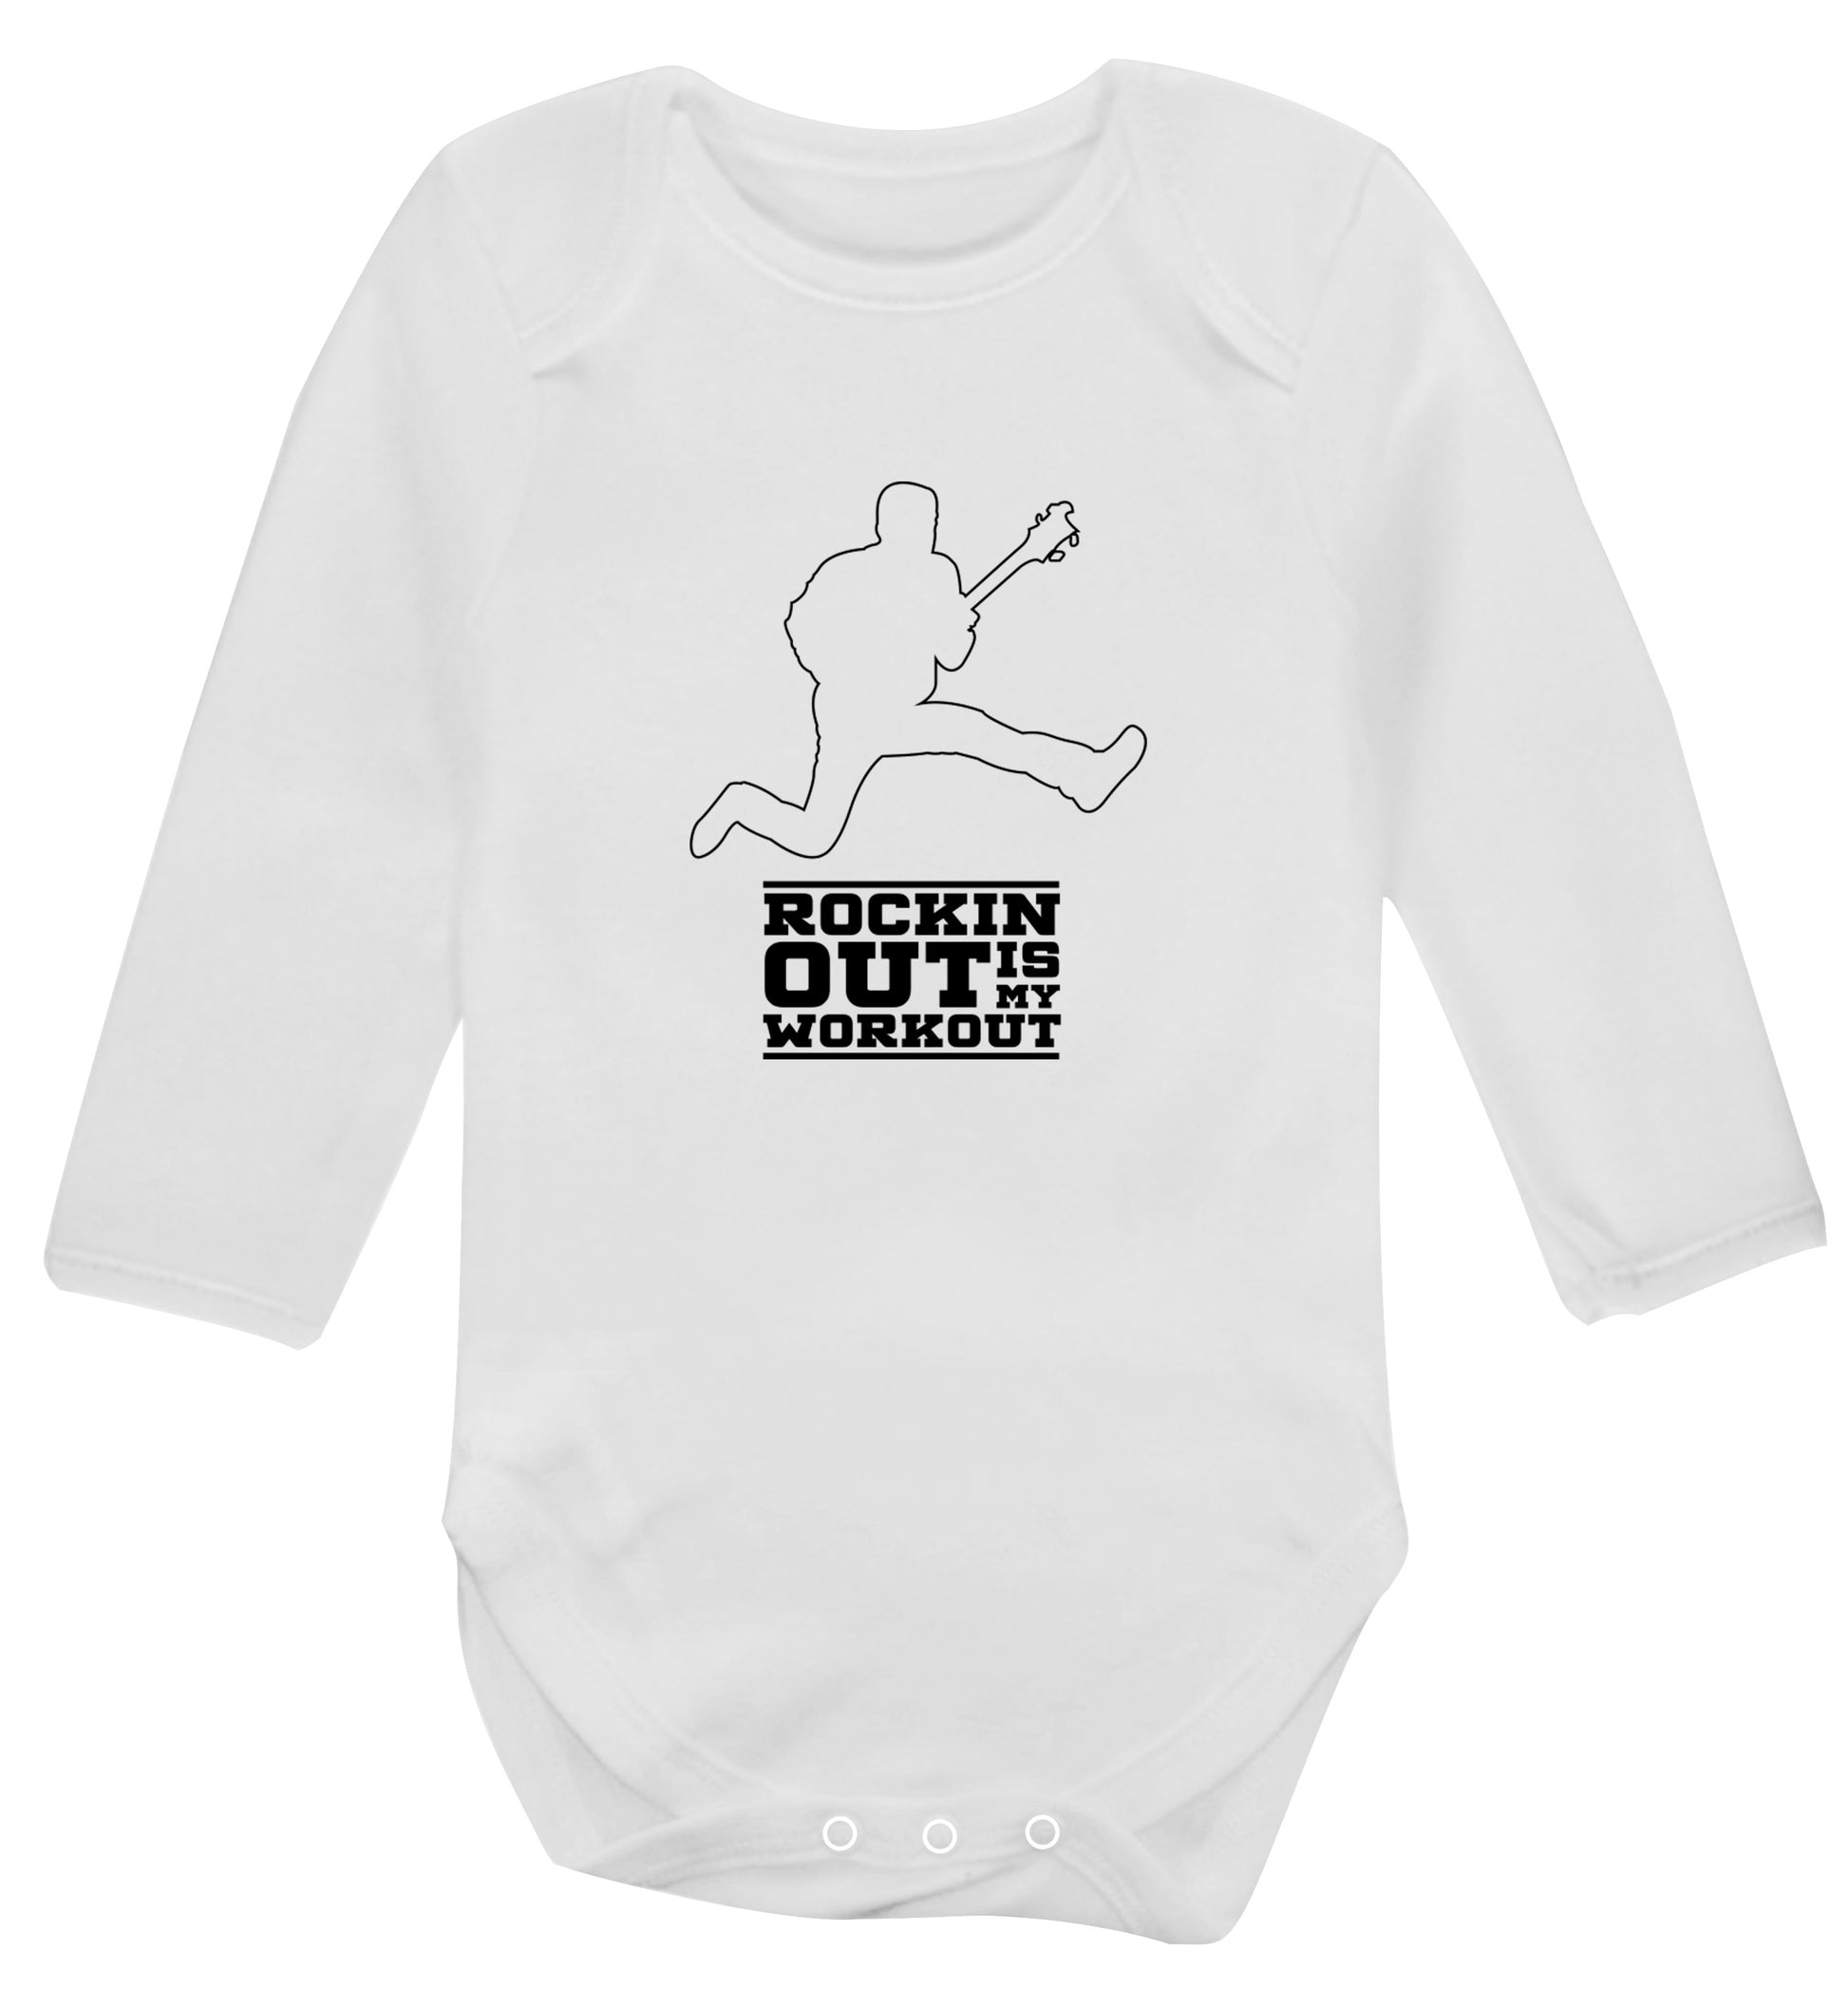 Rockin out is my workout 2 Baby Vest long sleeved white 6-12 months